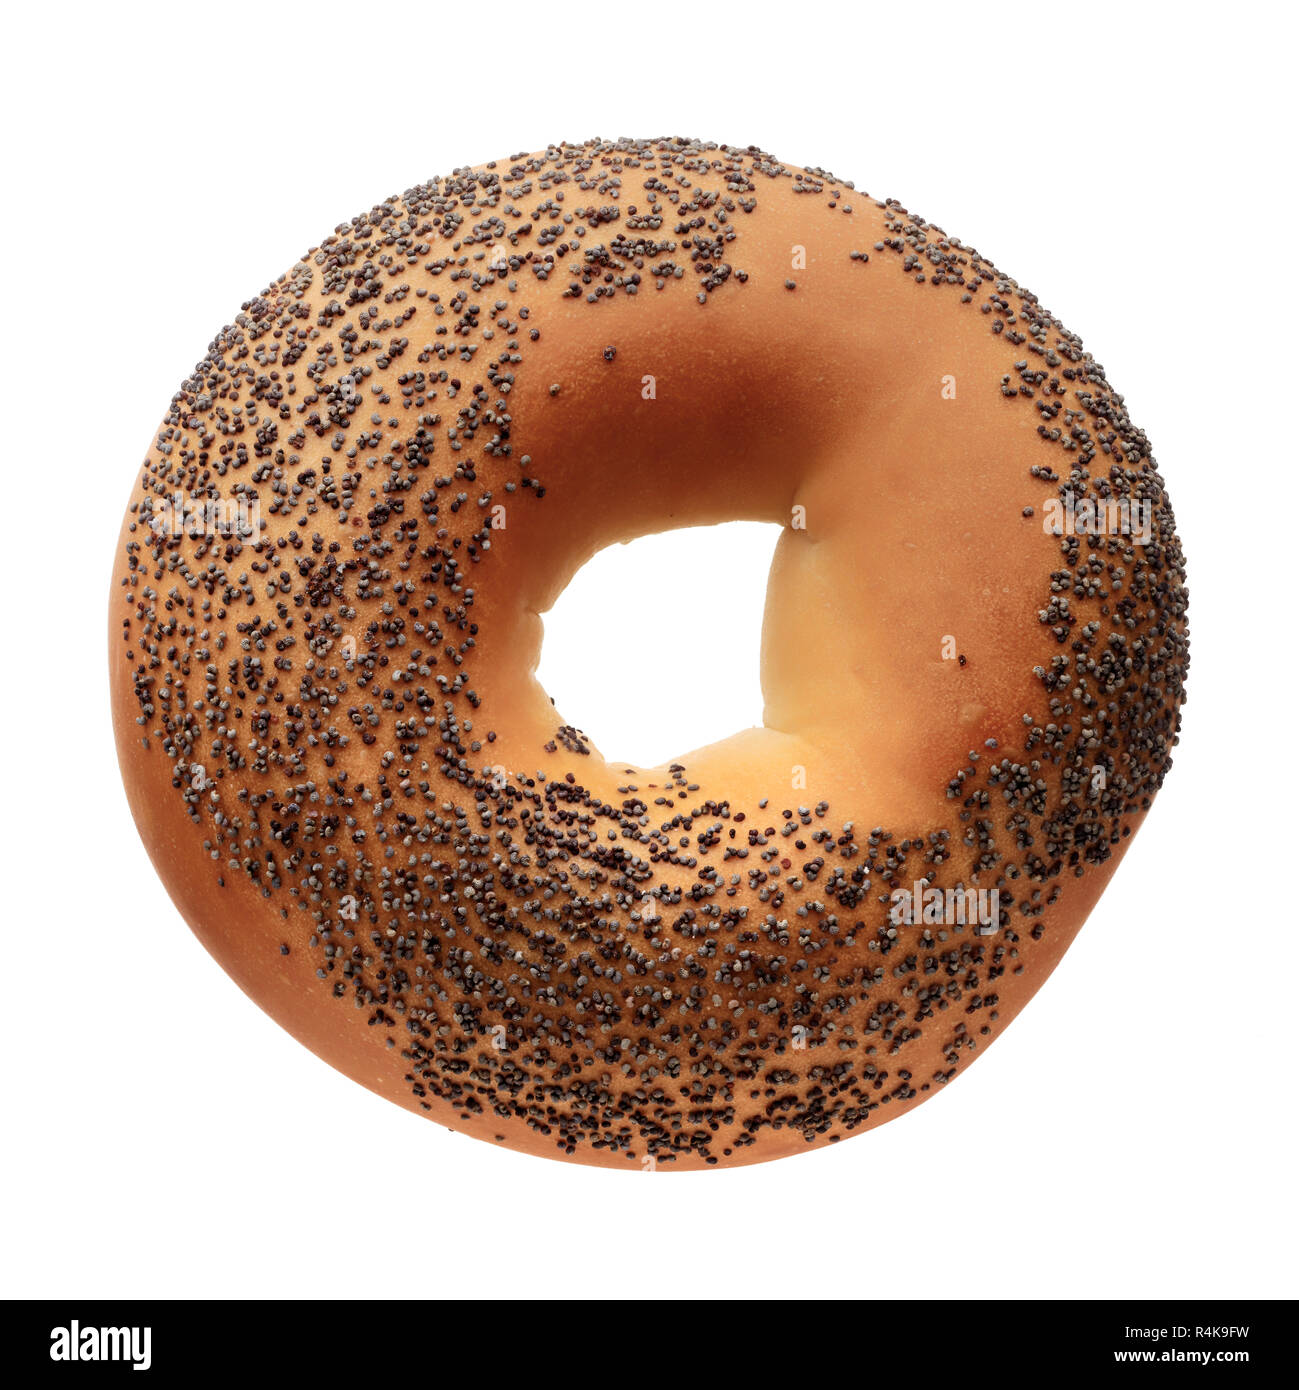 Food: single bagel with poppy seeds, isolated on white background Stock Photo